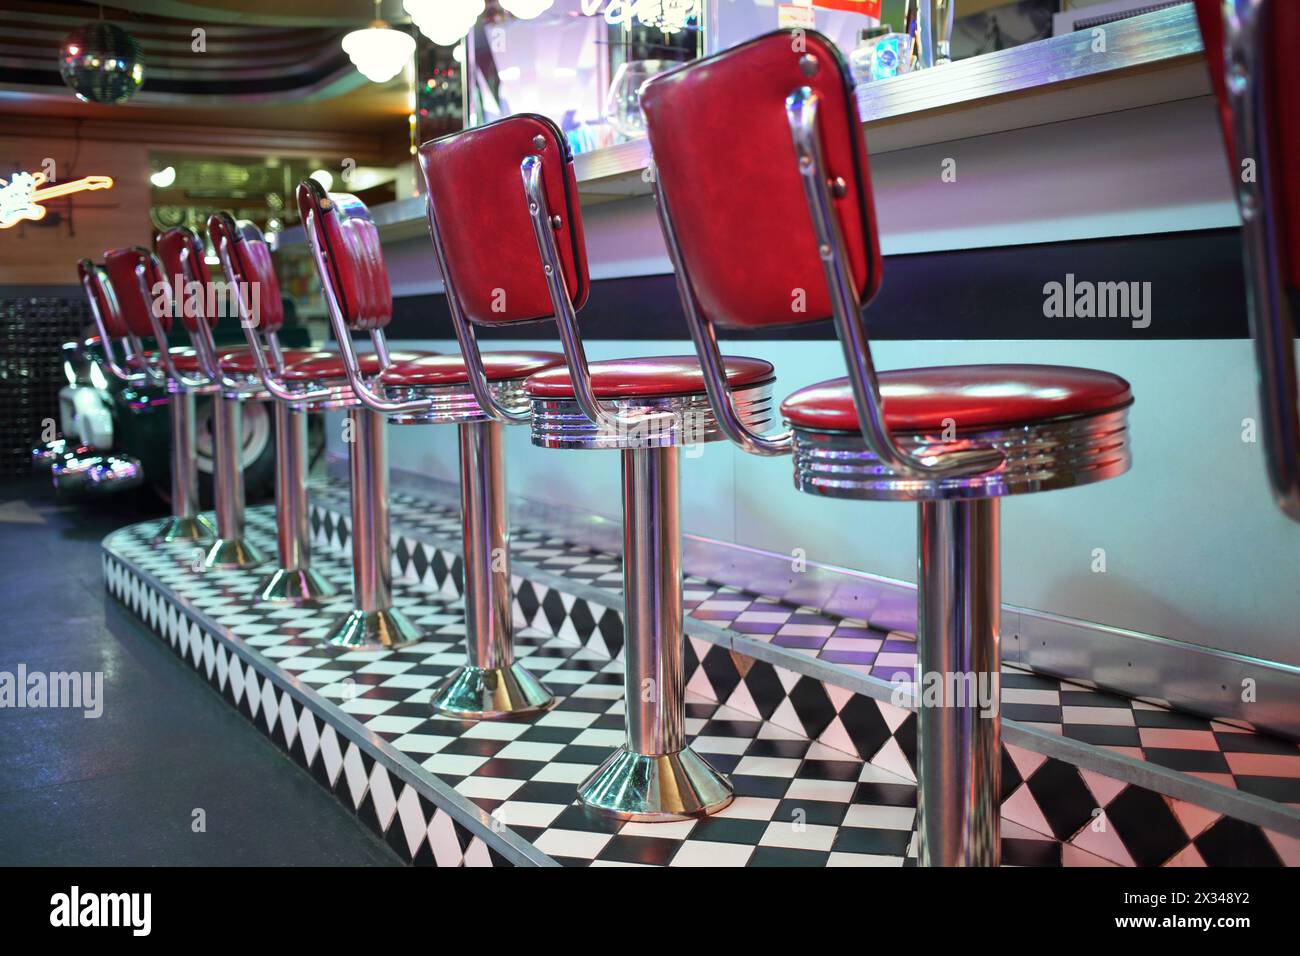 MOSCOW - JAN 21, 2015: Row of red chairs near bar counter at the American restaurant Beverly Hills Diner Stock Photo